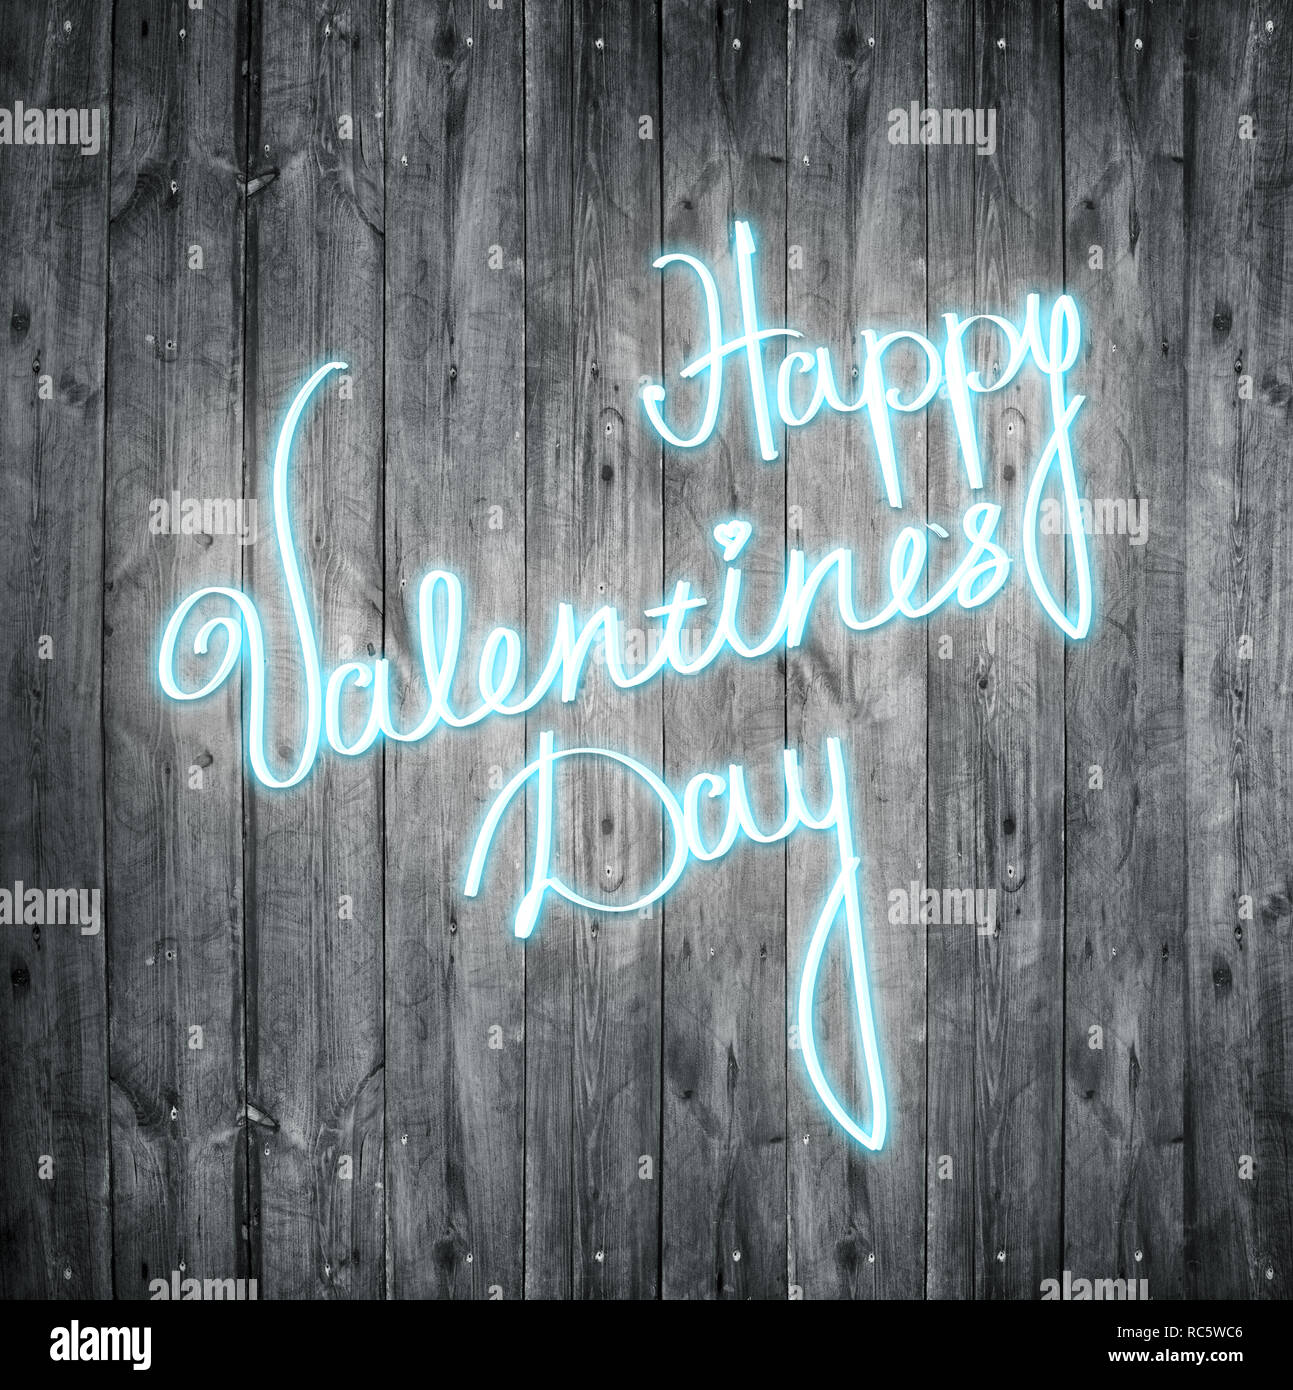 Happy valentines day neon sign over wooden background. Stock Photo